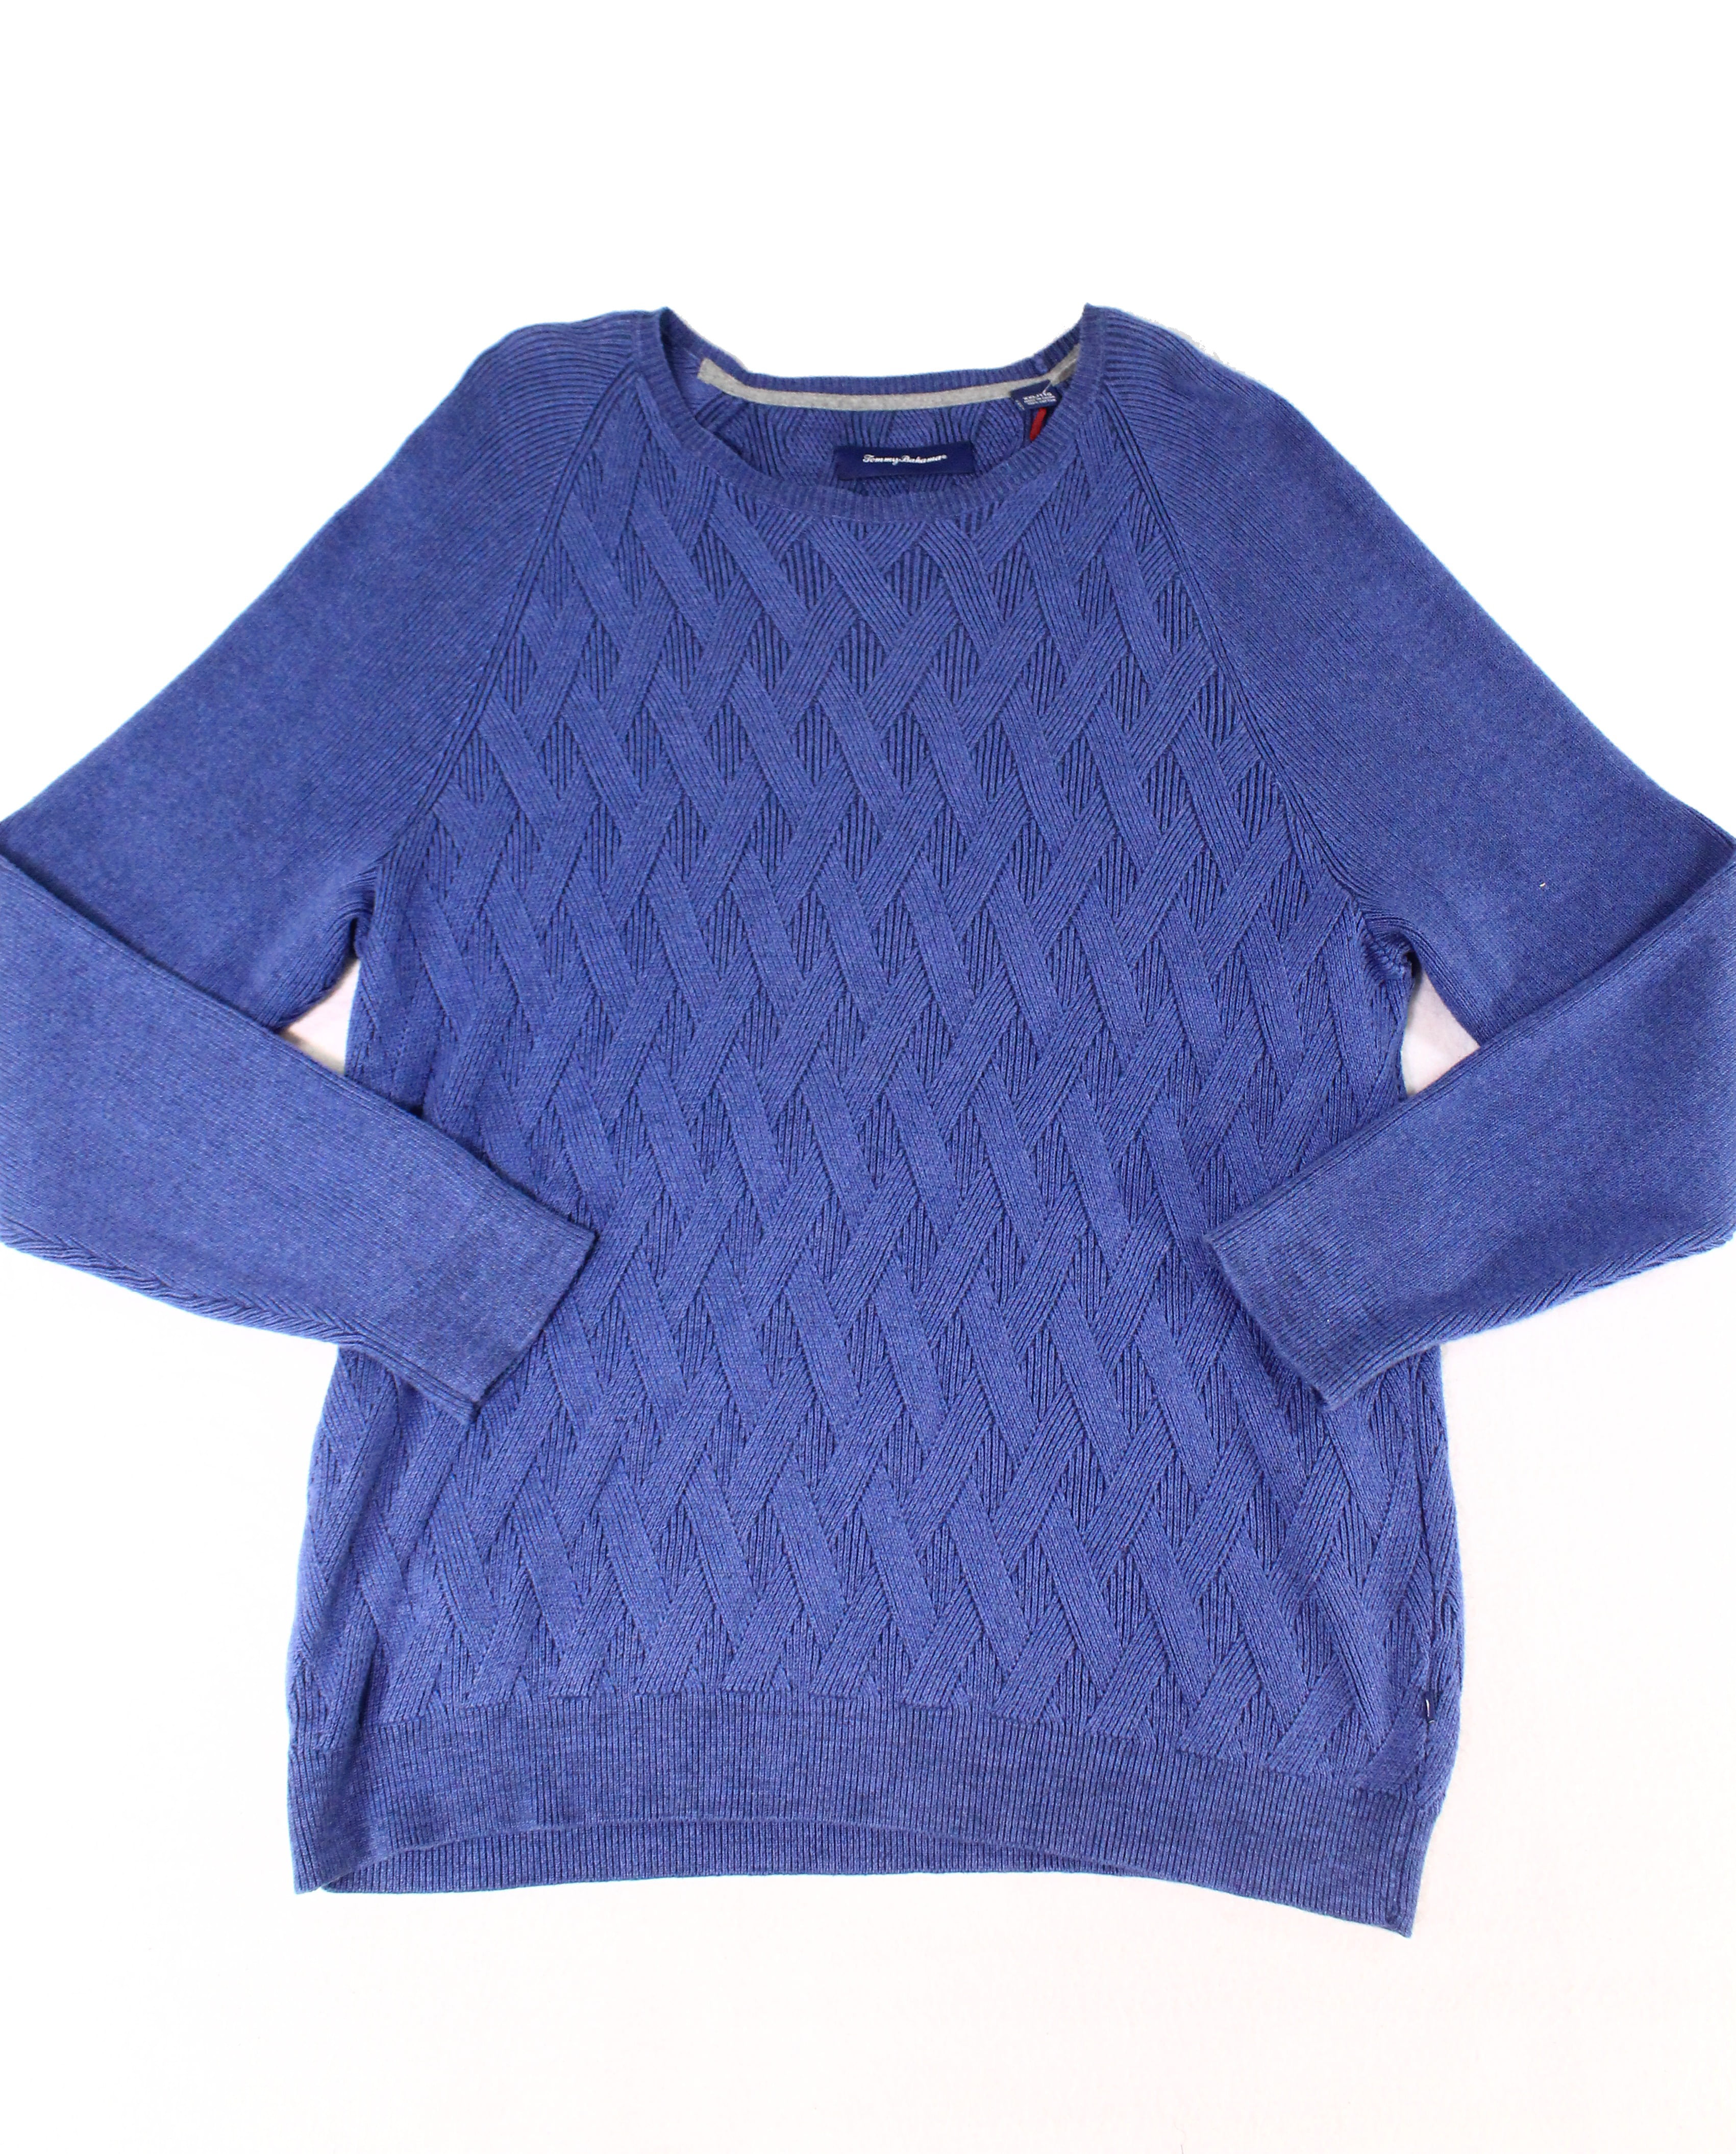 Tommy Bahama - Tommy Bahama NEW Blue Mens Size 2XL Cable Knit Crewneck ...